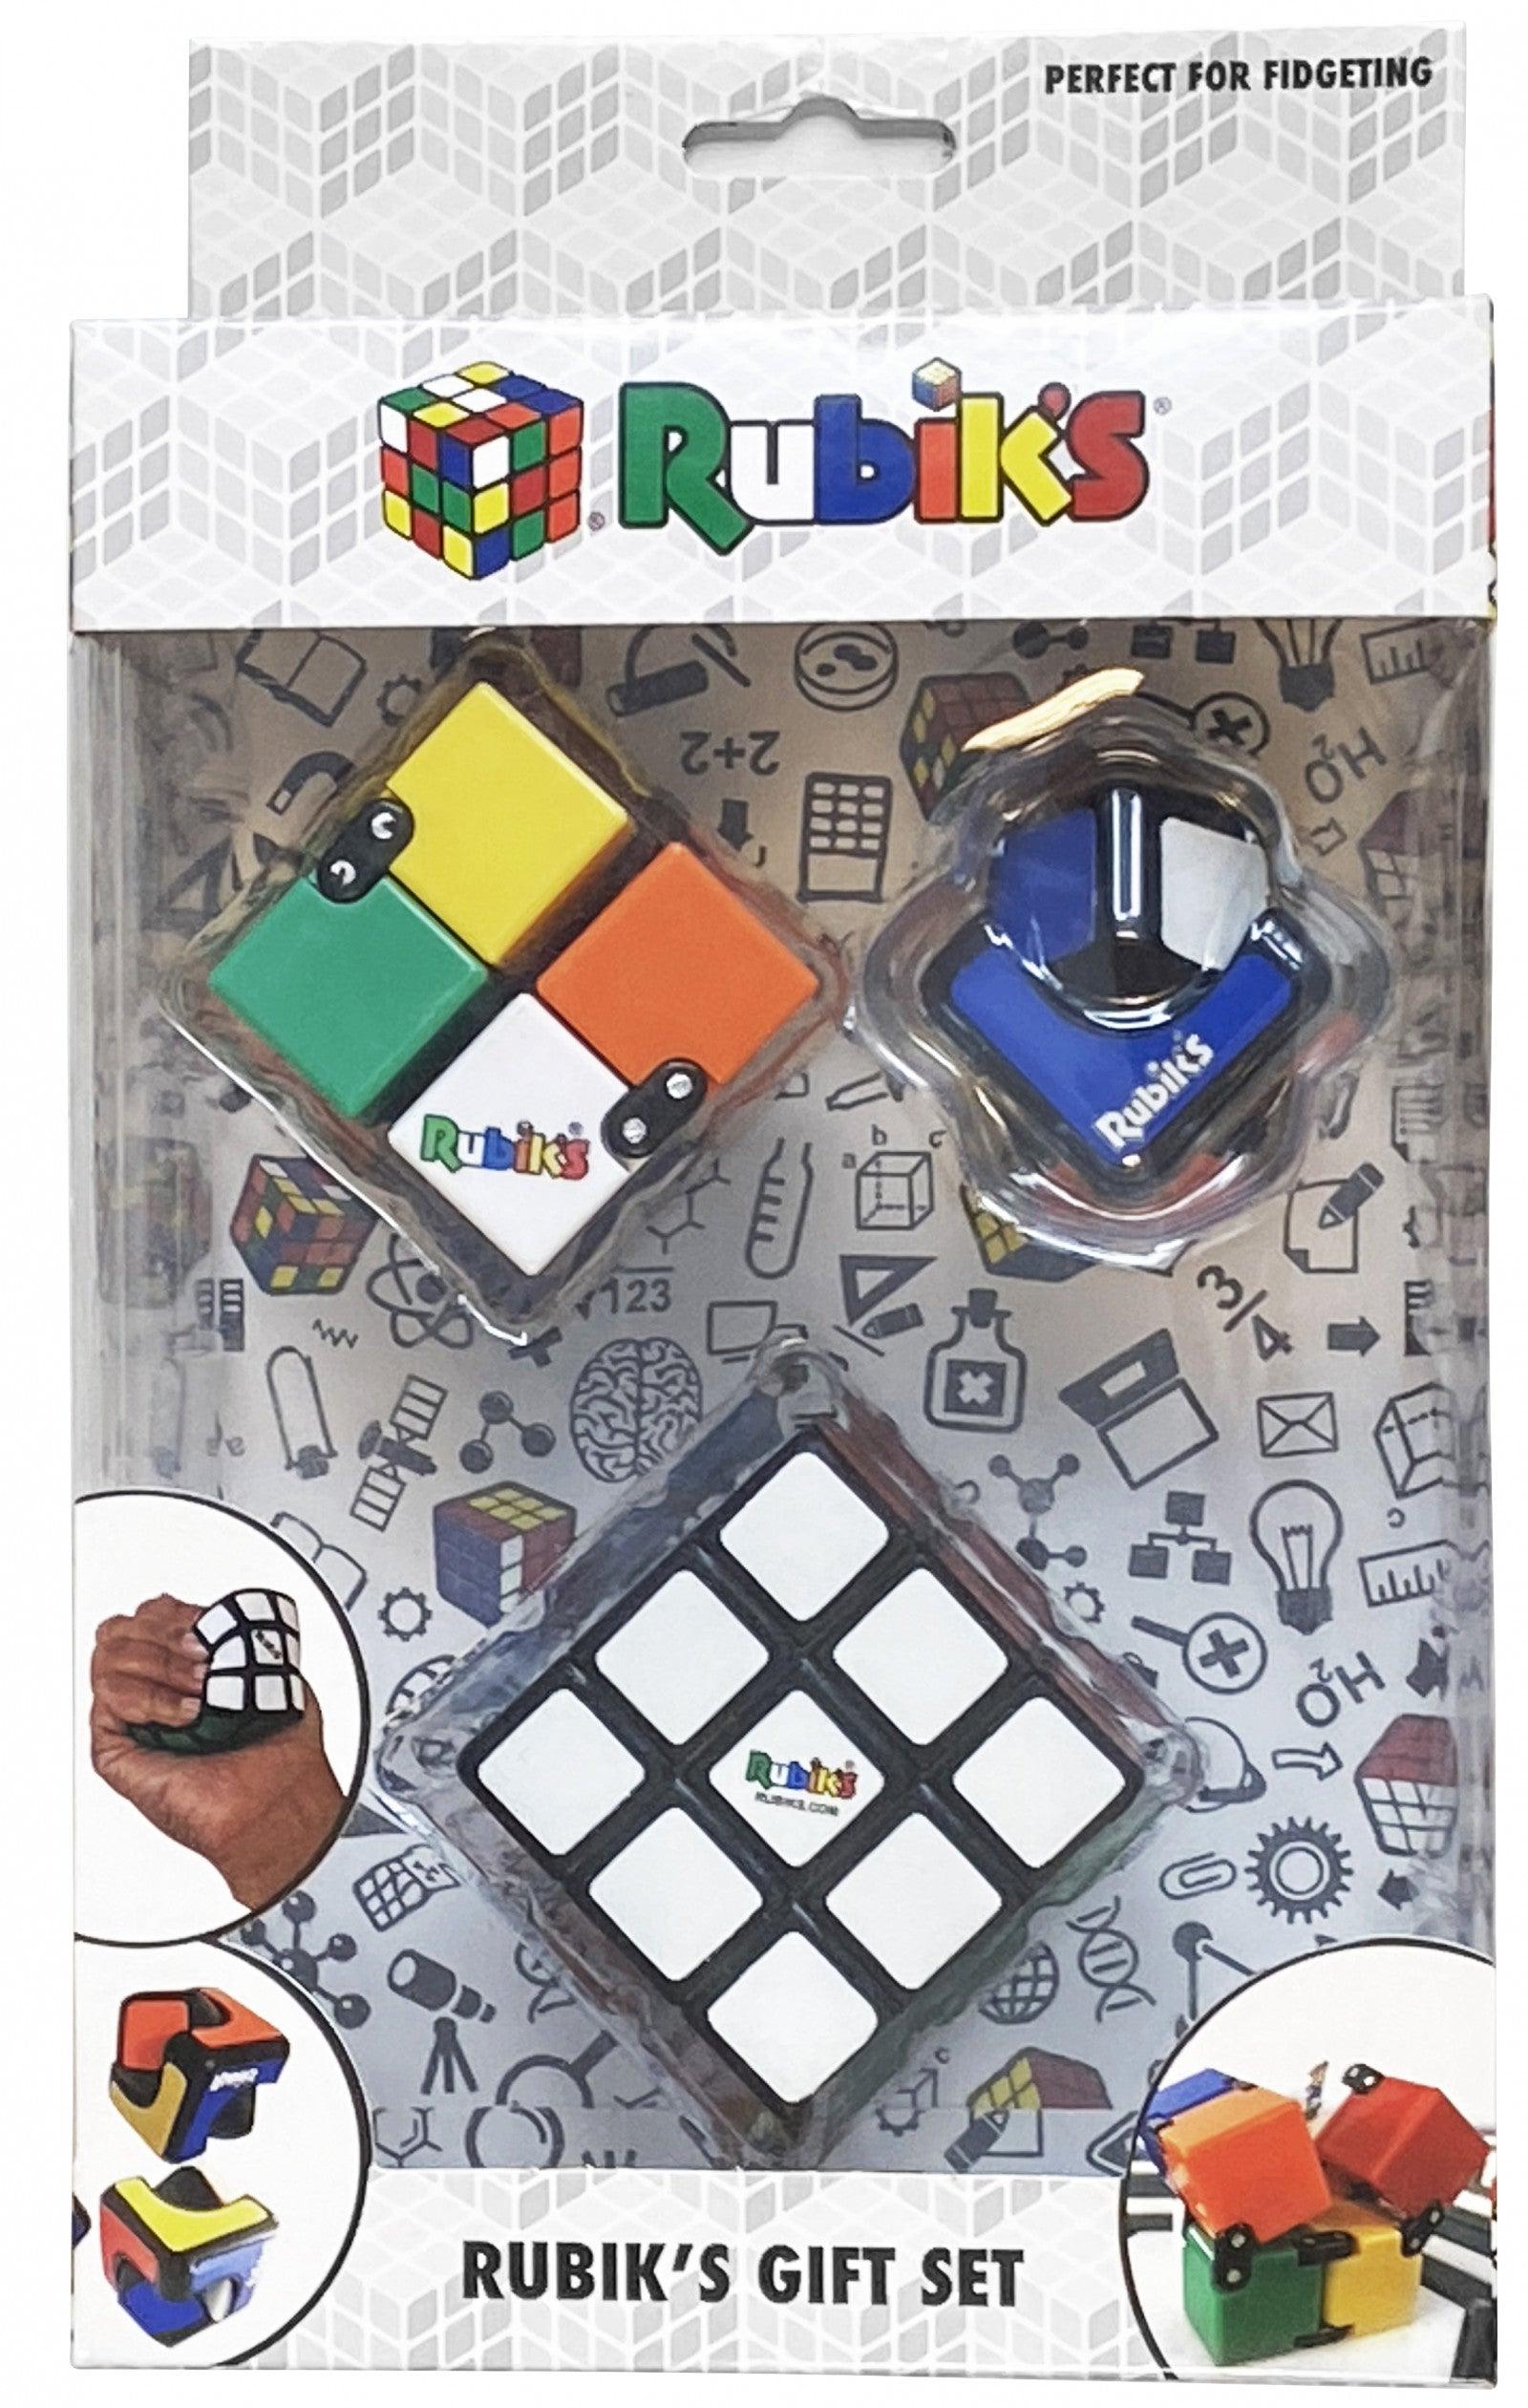 VR-91400 Rubiks Gift Set (Includes Squishy Cube, Infinity Cube and Spin Cublet) - Rubiks - Titan Pop Culture